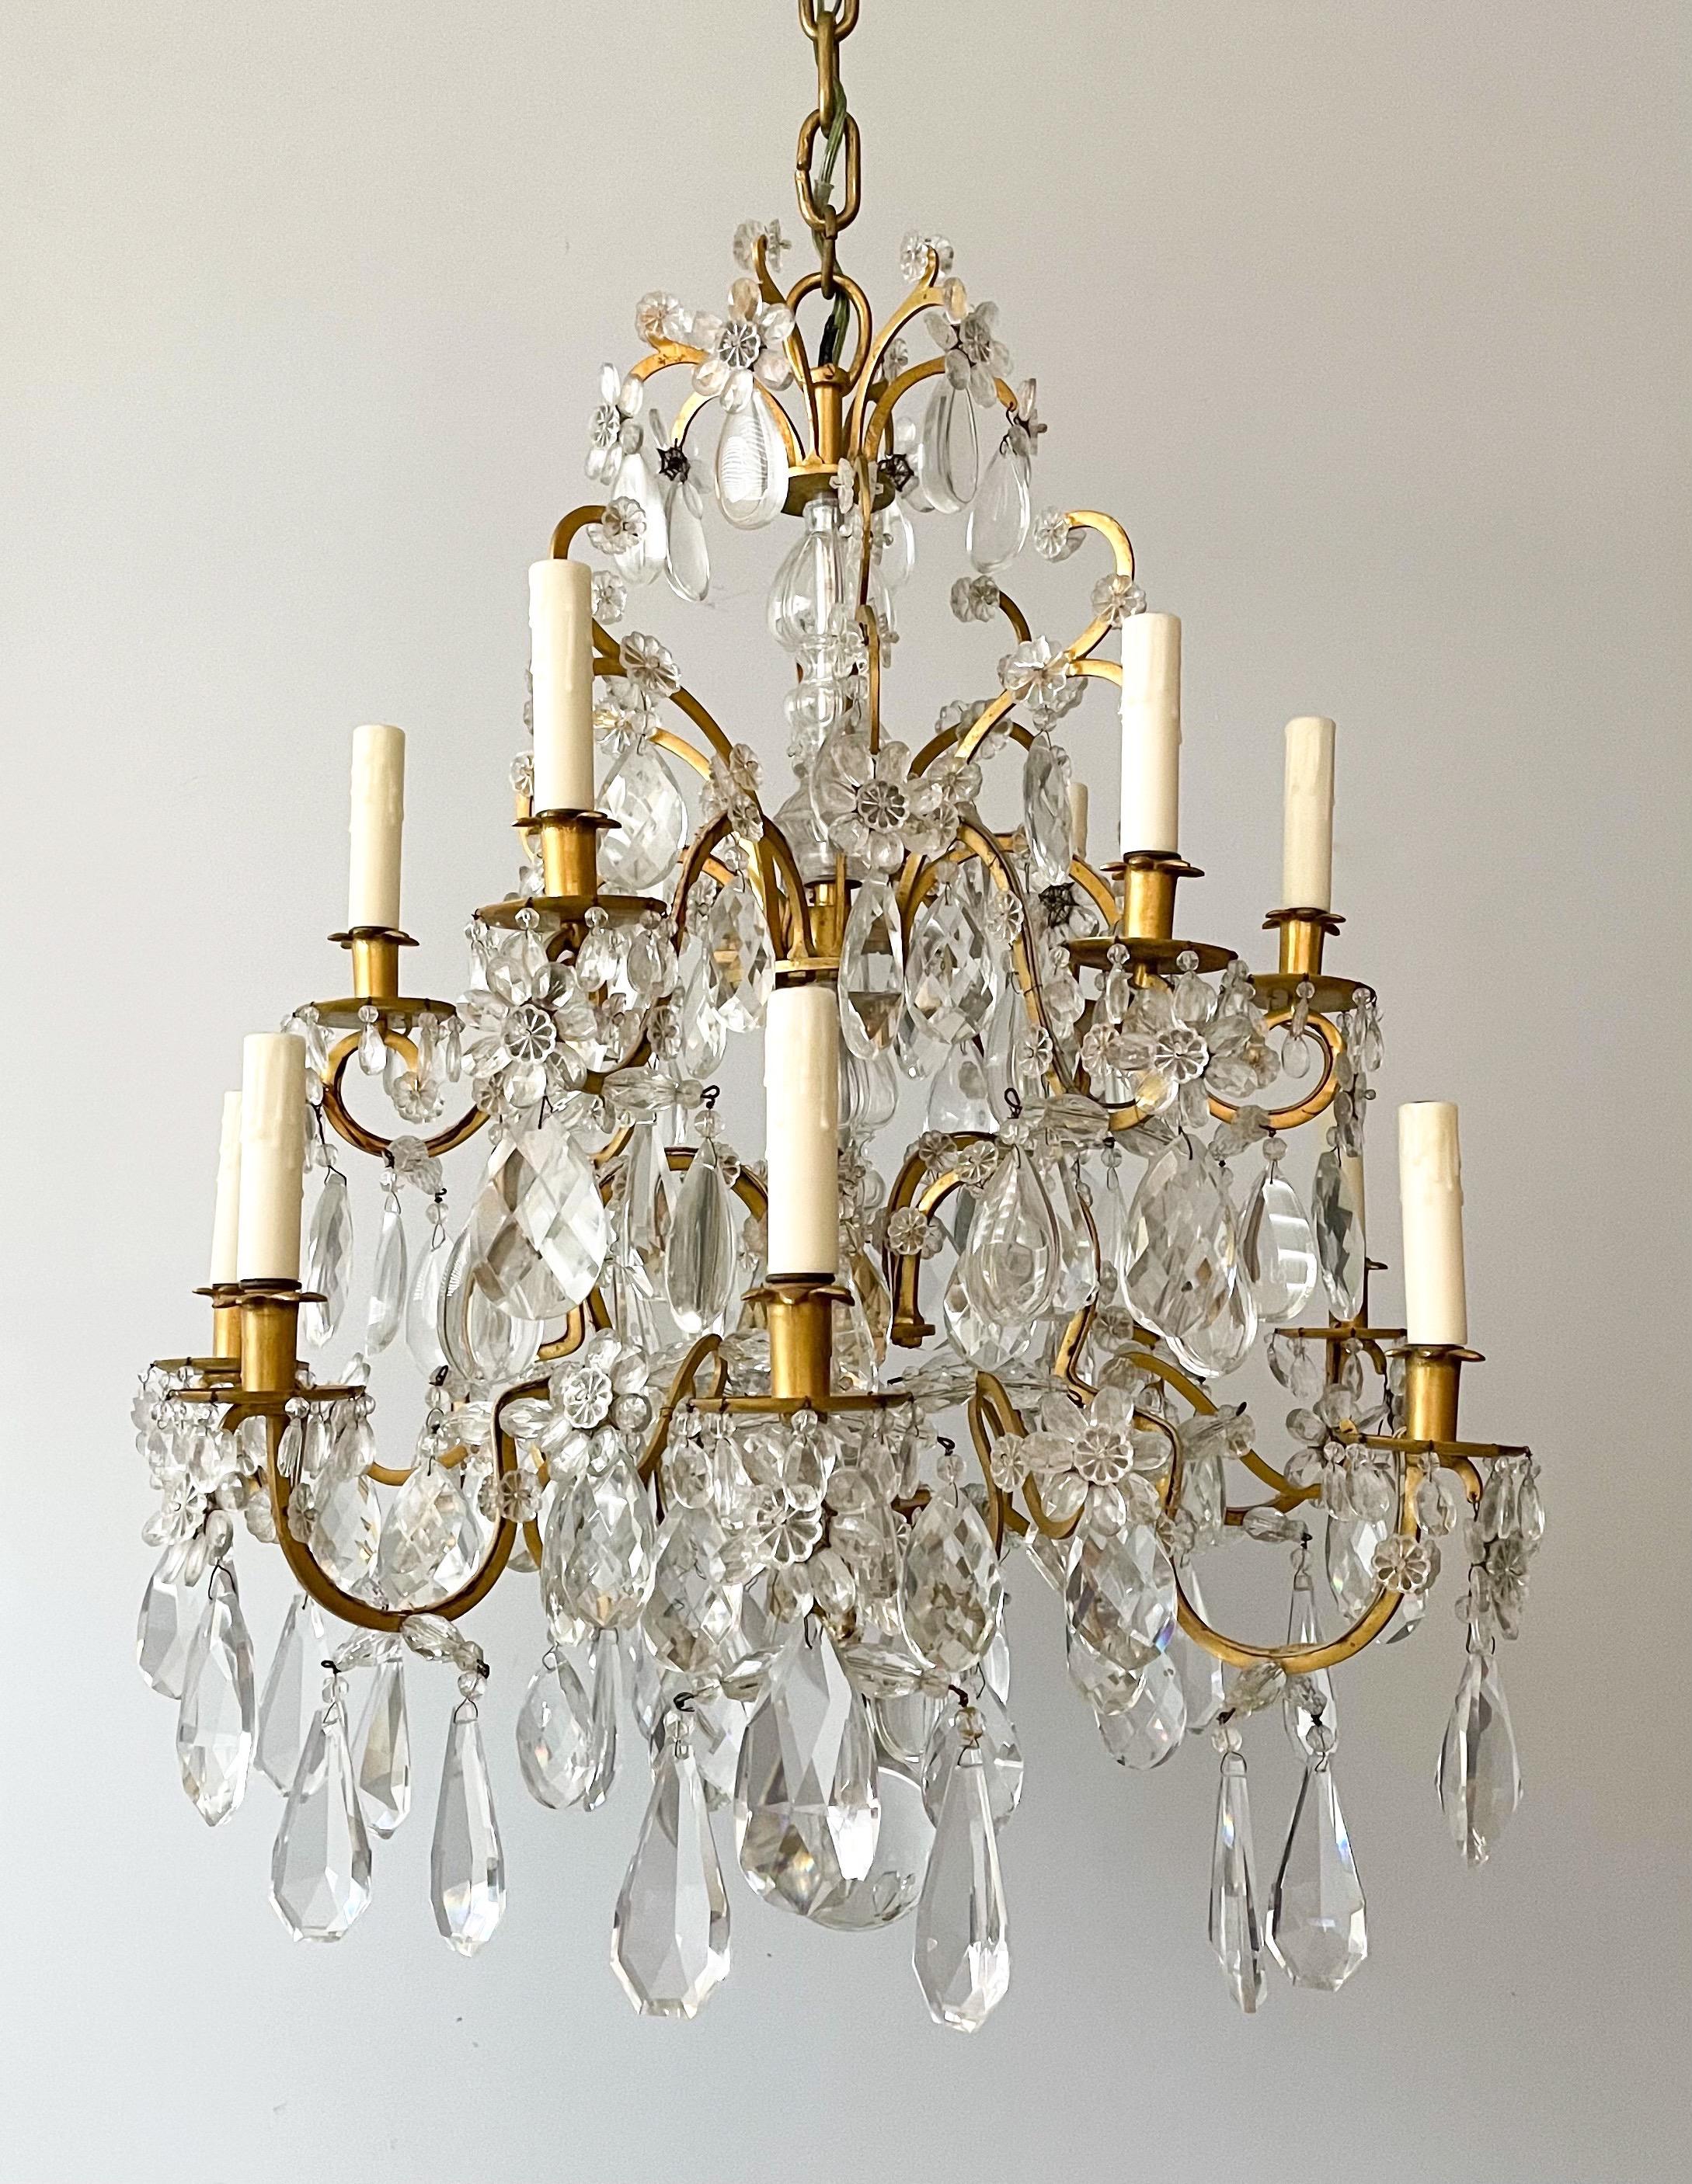 Exquisite, antique French sparkling crystal chandelier in the Versailles style. 

This impressive chandelier consists of a shapely 2-tier bronze frame with a crystal column in its center, it is decorated with an abundance of faceted prisms in a